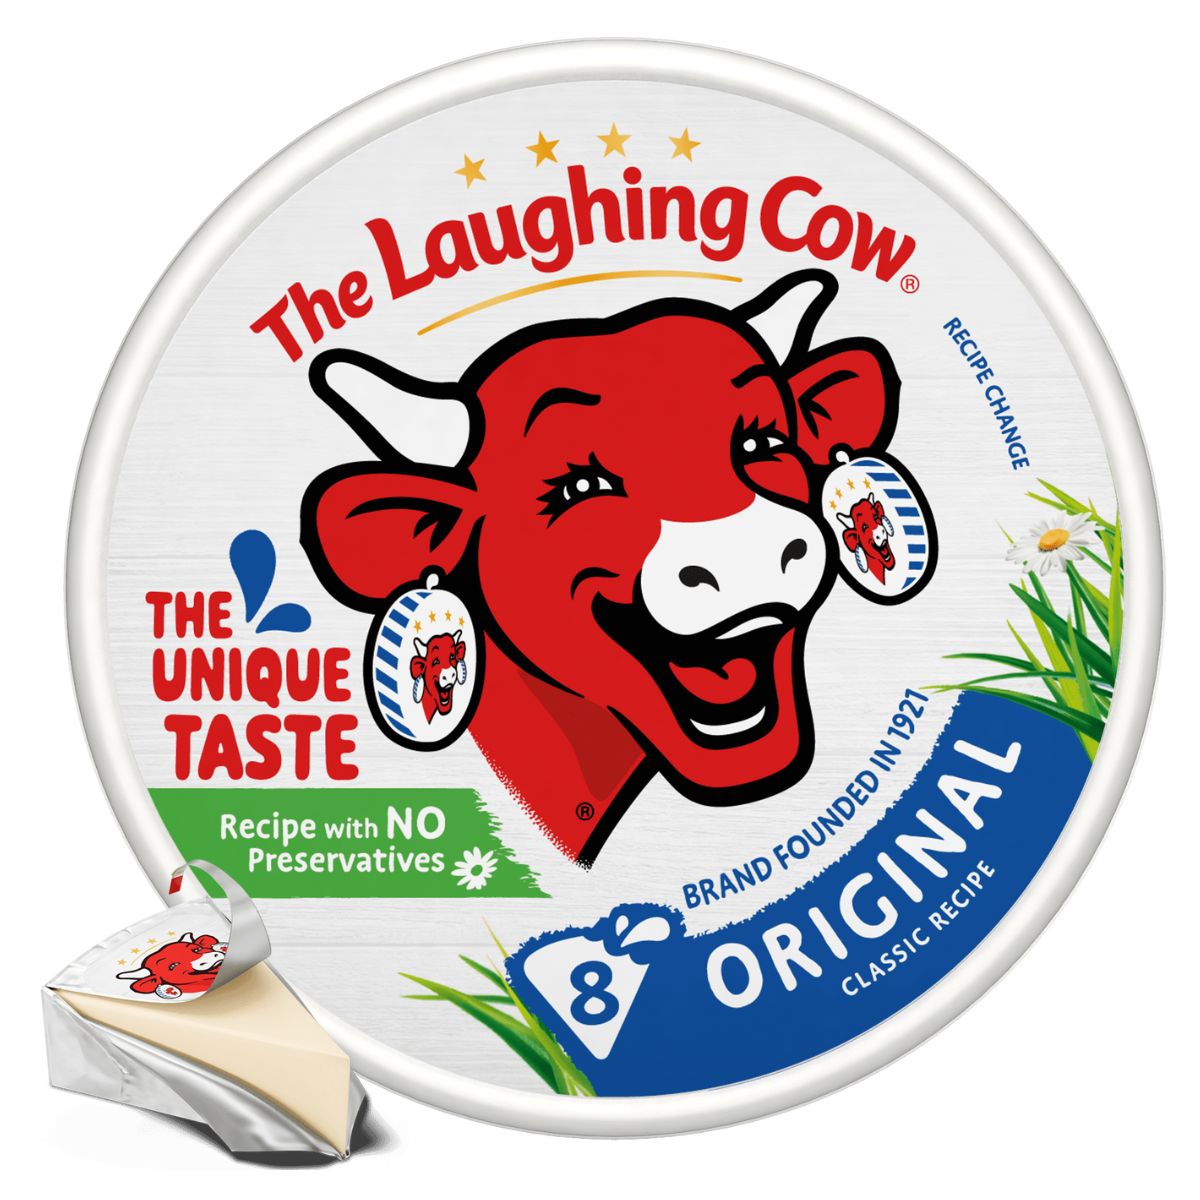 The Laughing Cow Triangle 8 Original - 120g cheese.